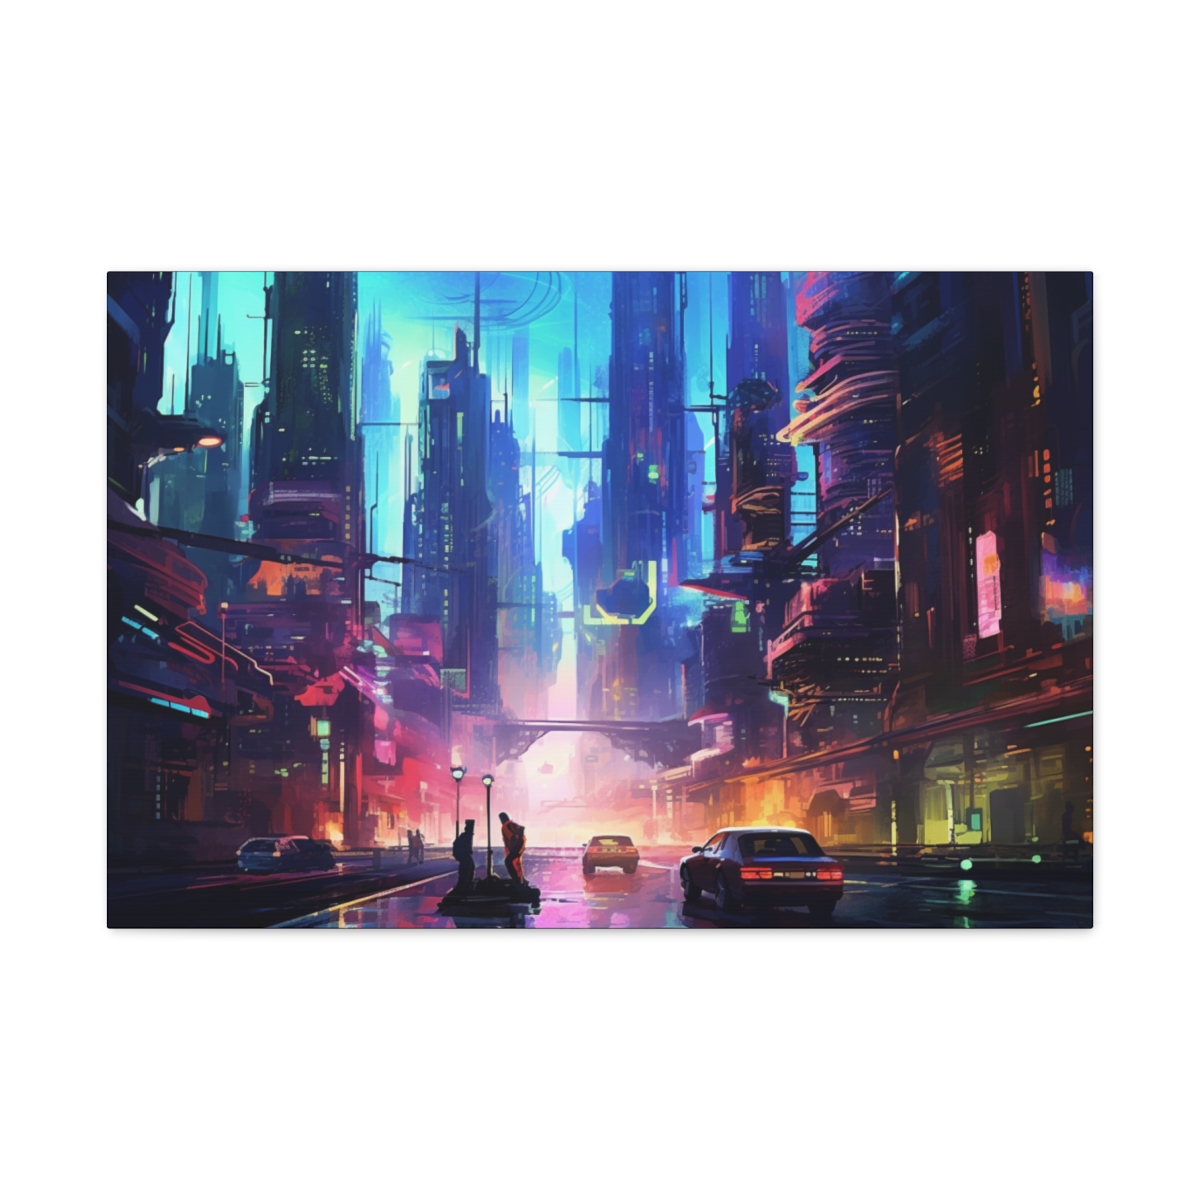 Fantasy Space Wall Art Canvas Print: The Great Leap Forward